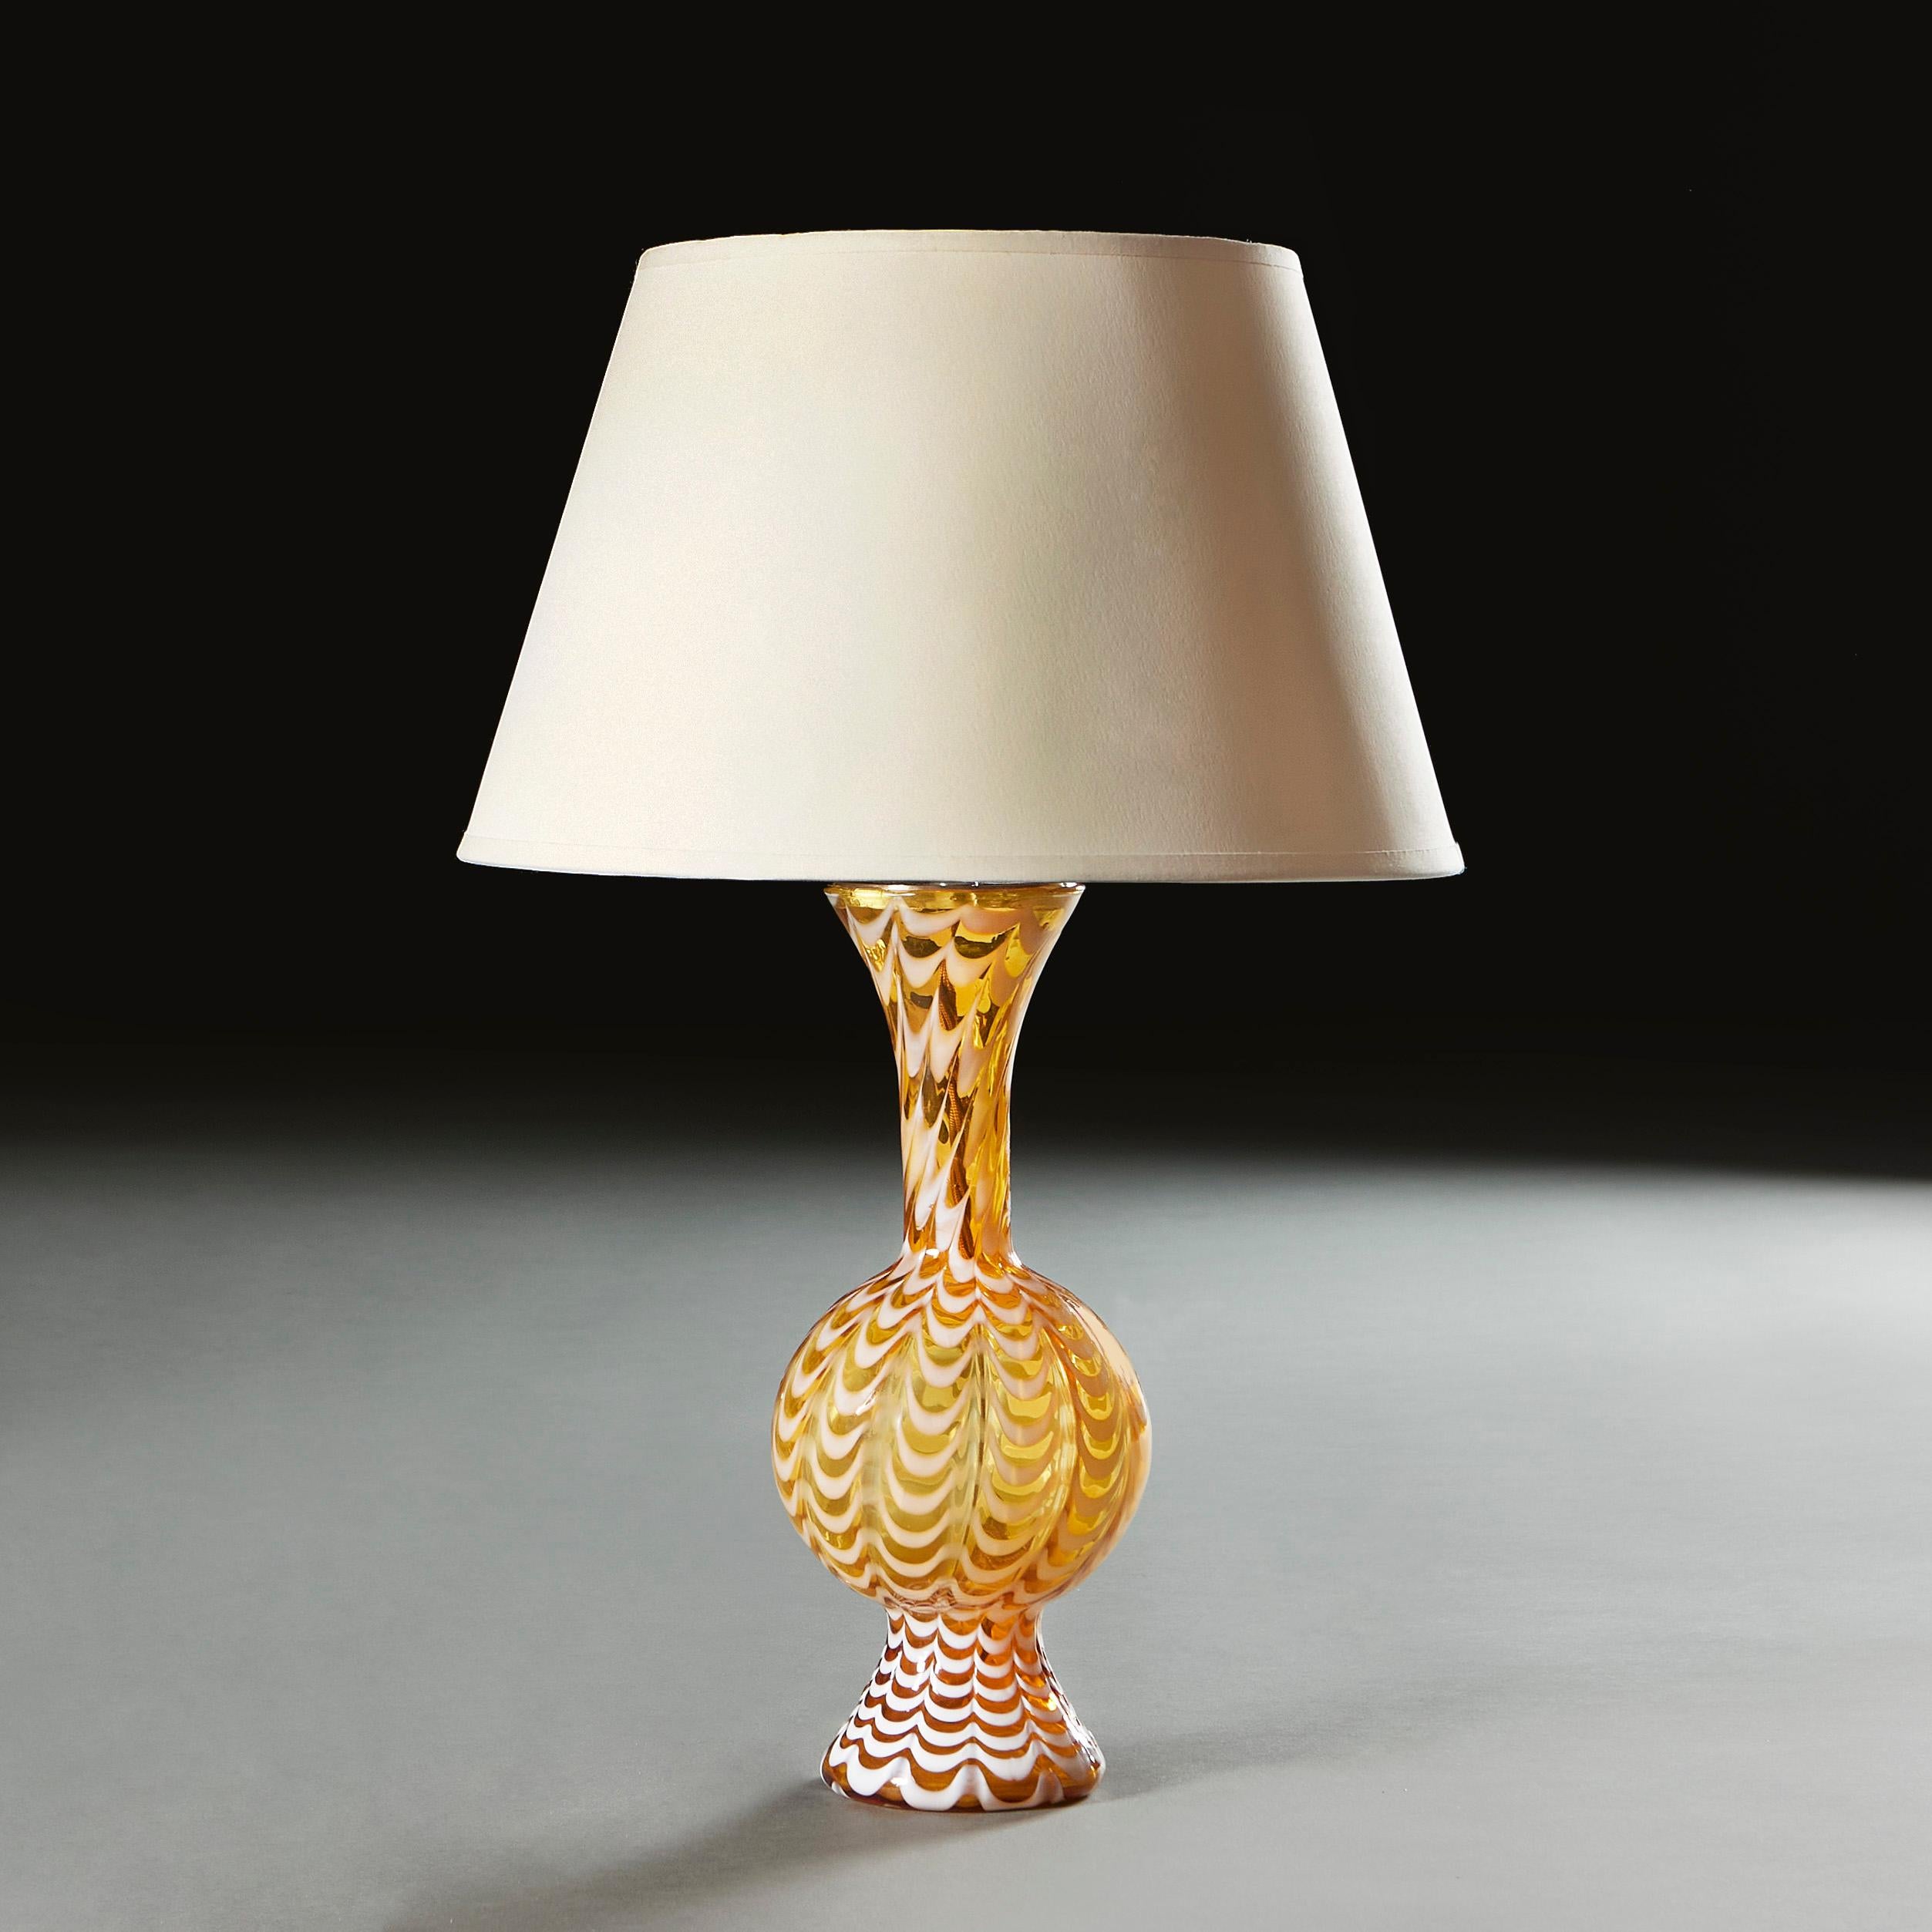 Italy, circa 1940

A midcentury Murano glass lamp, the amber glass with white feathered glaze with bulbous body and a flared neck. 

Height of vase 33.00cm 
Height with shade 56.00cm
Diameter of base 10.00cm

Please note: This is currently